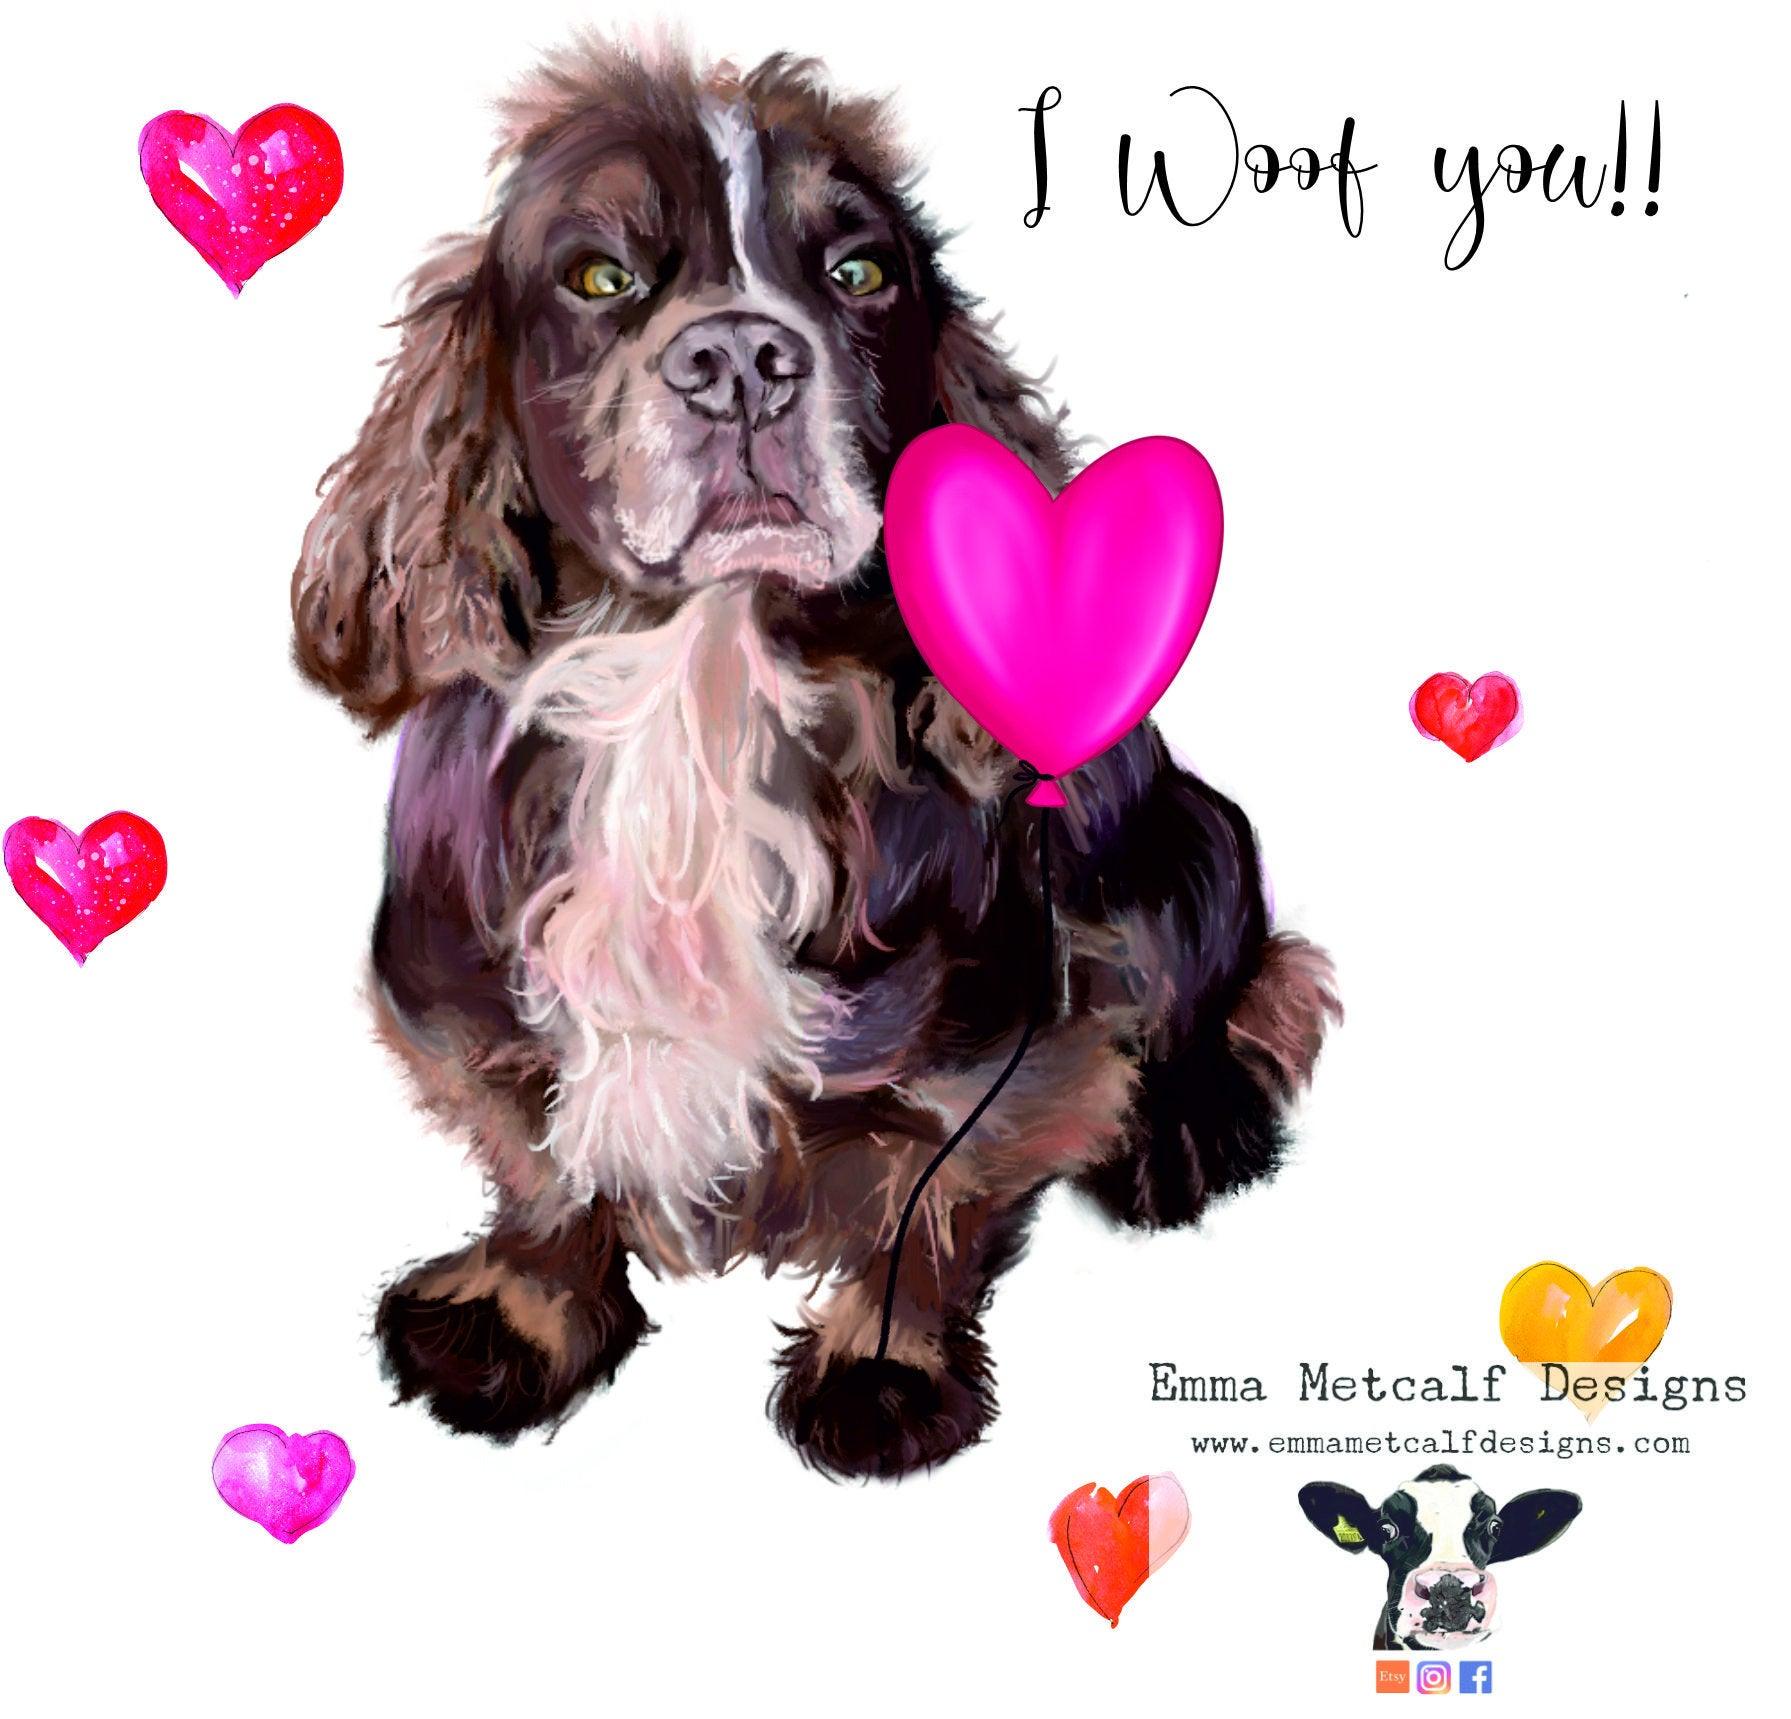 I Woof You - Beautiful Dog Valentine's card for him,her,themlove,Valentine's day,Feb 14th,open,friend,best friend,wife,husband,fiancee, dog